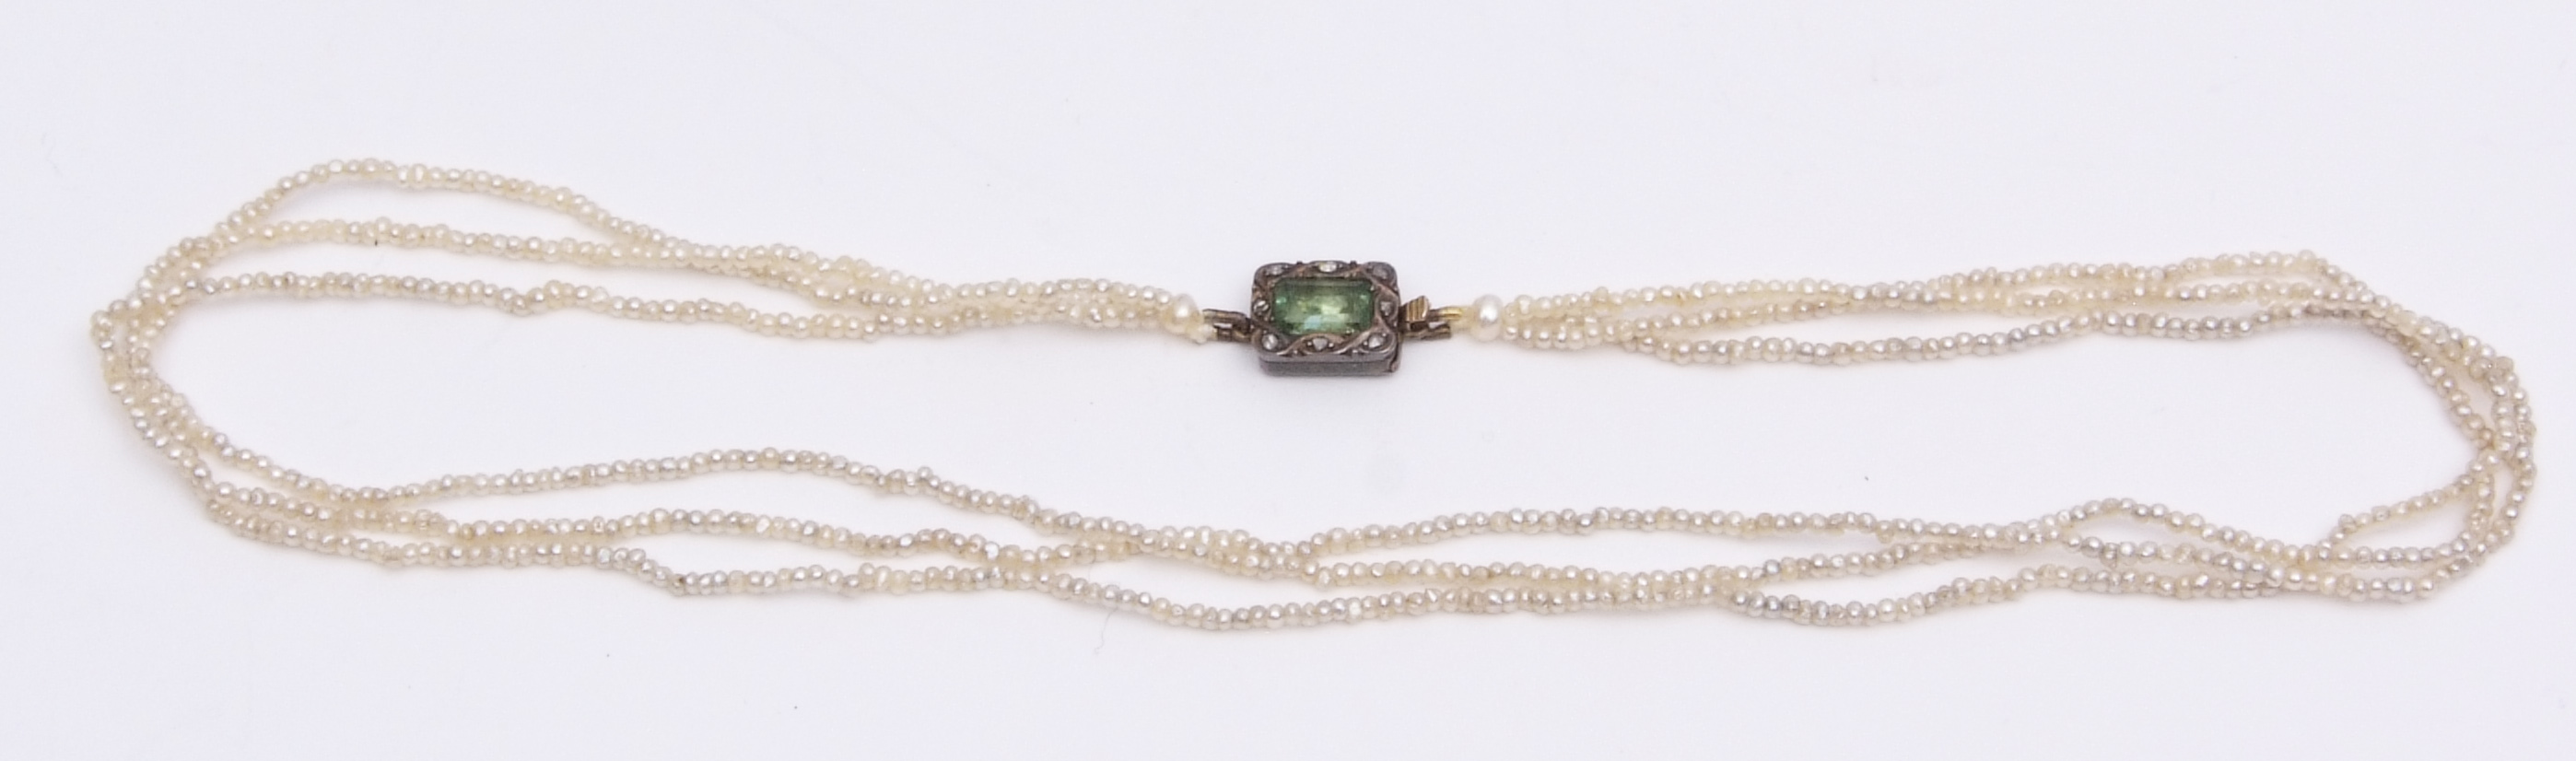 Early 20th century seed pearl necklace, a triple row of tiny white seed pearls onto